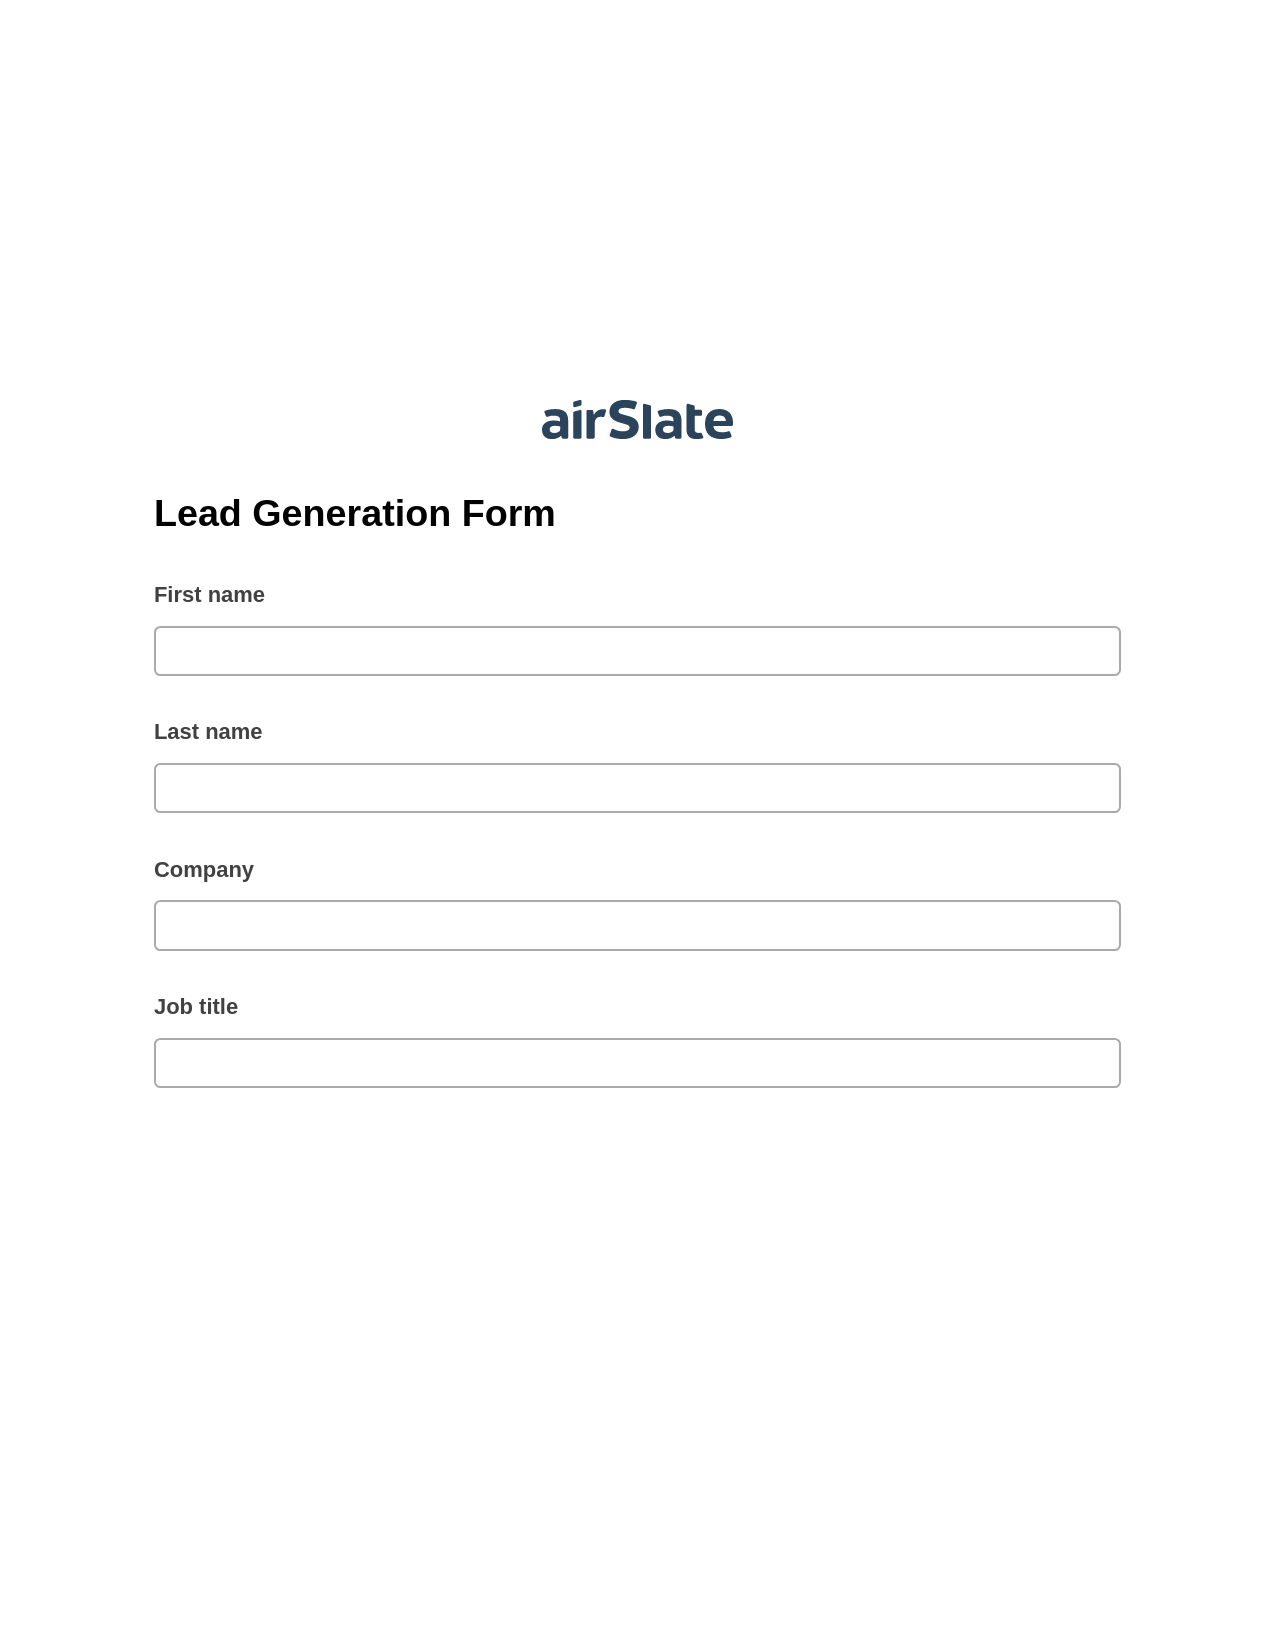 Lead Generation Form Pre-fill from MySQL Bot, Send a Slate with Roles Bot, Post-finish Document Bot